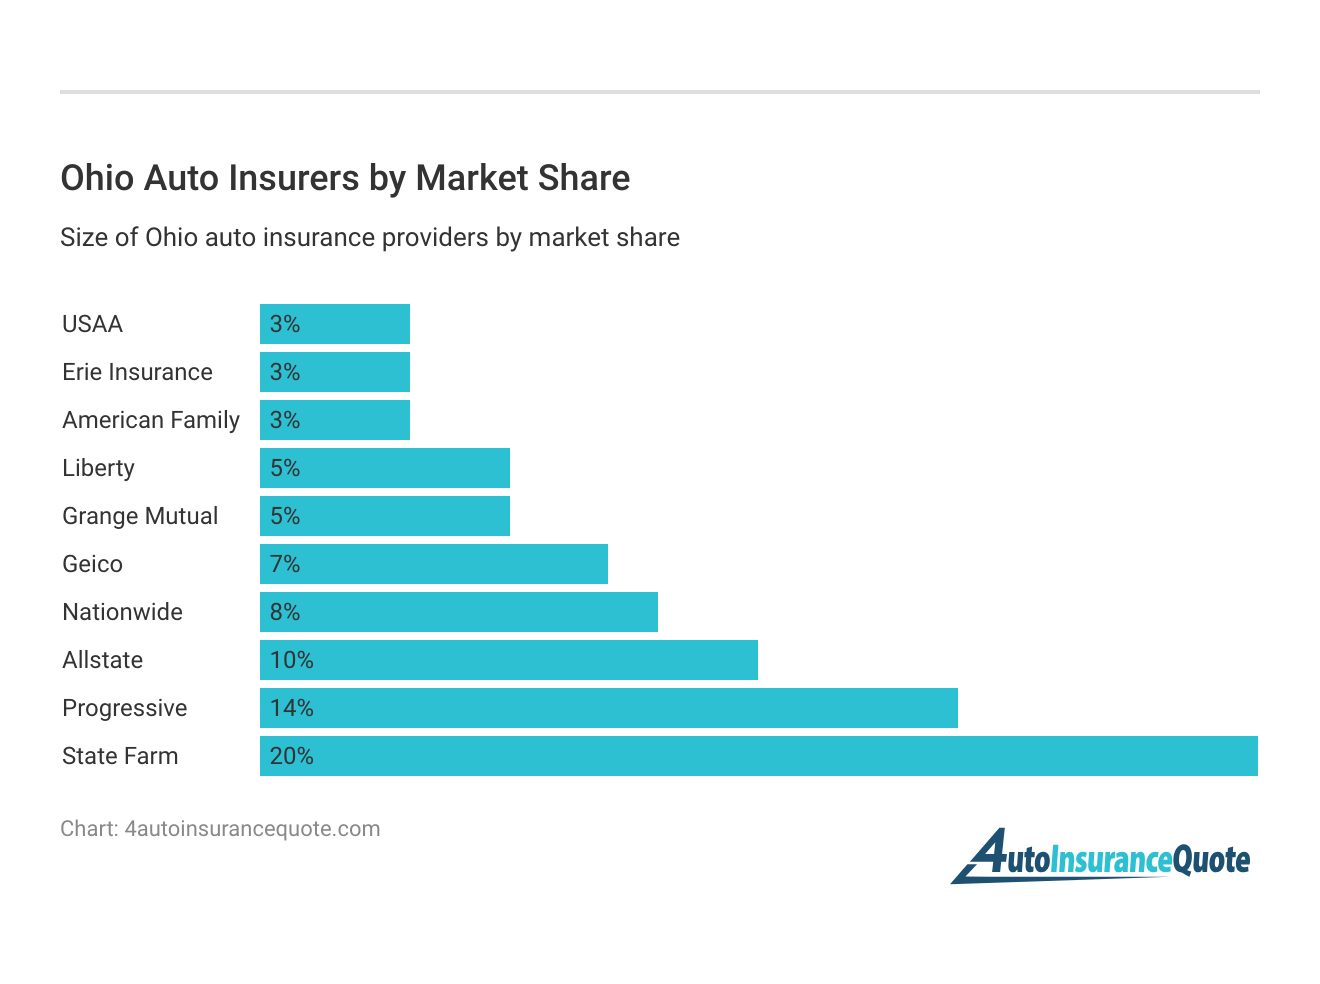 <h3>Ohio Auto Insurers by Market Share</h3>